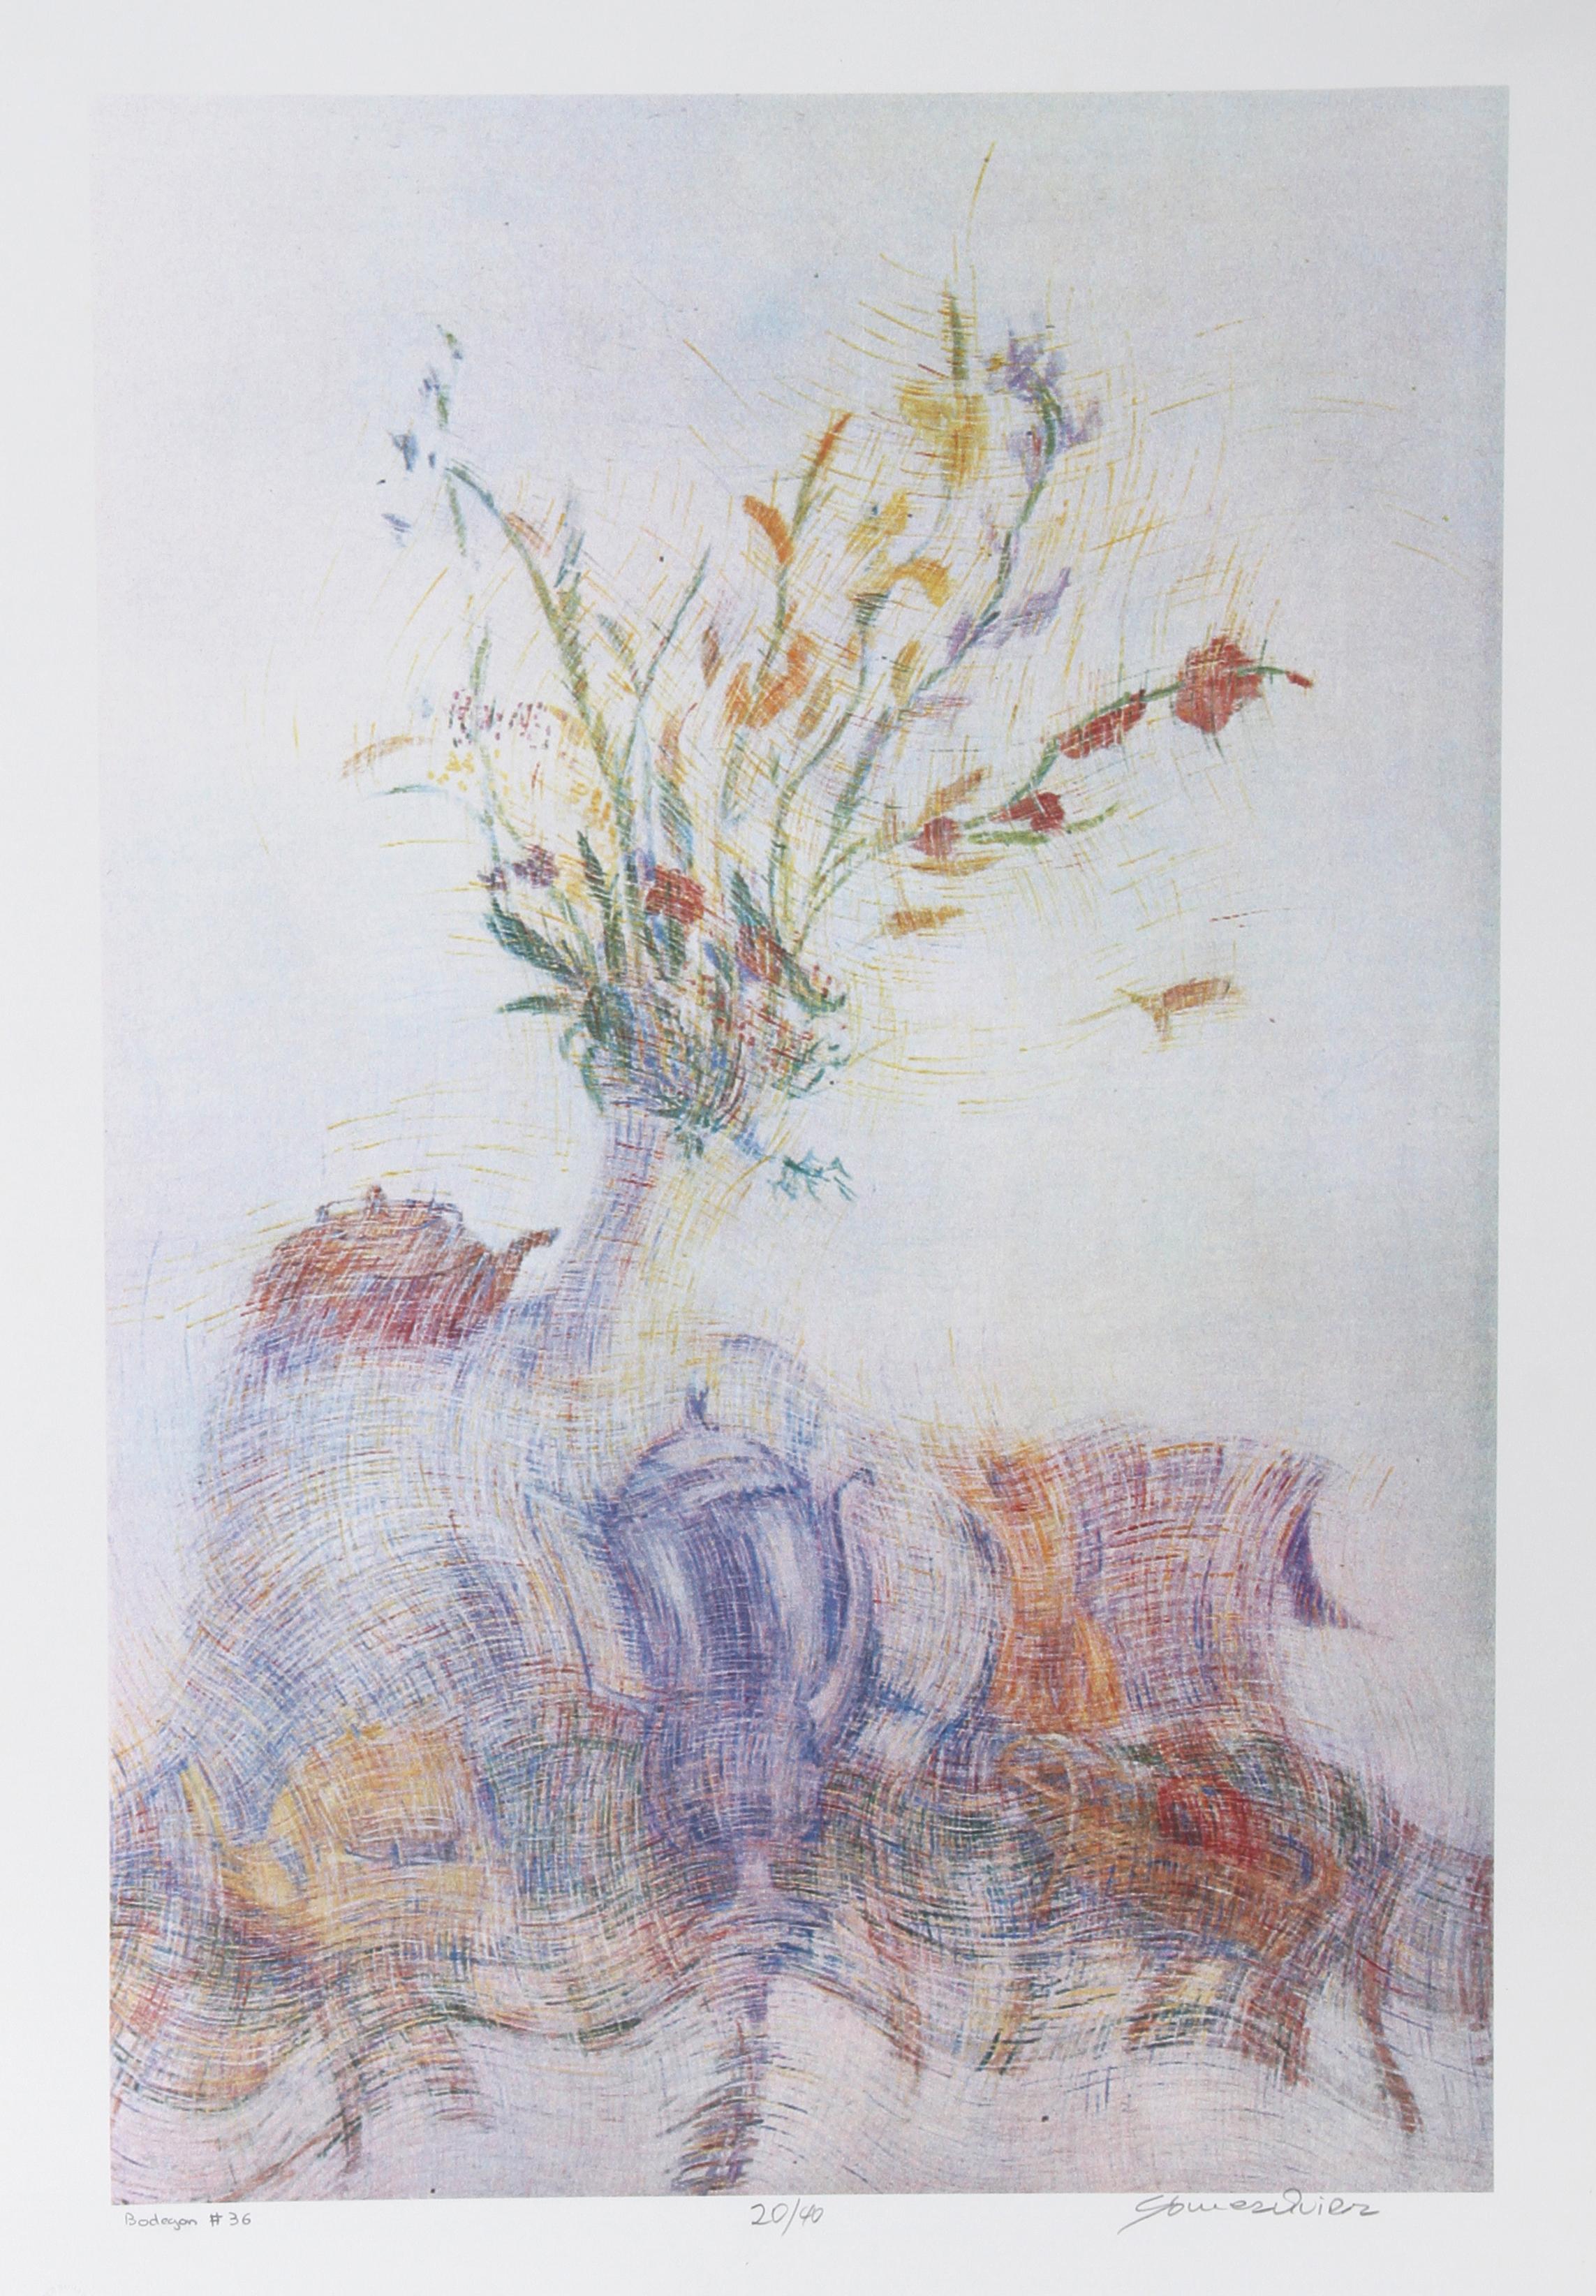 Bodegon 36, Surreal Still Life Lithograph by Quiroz